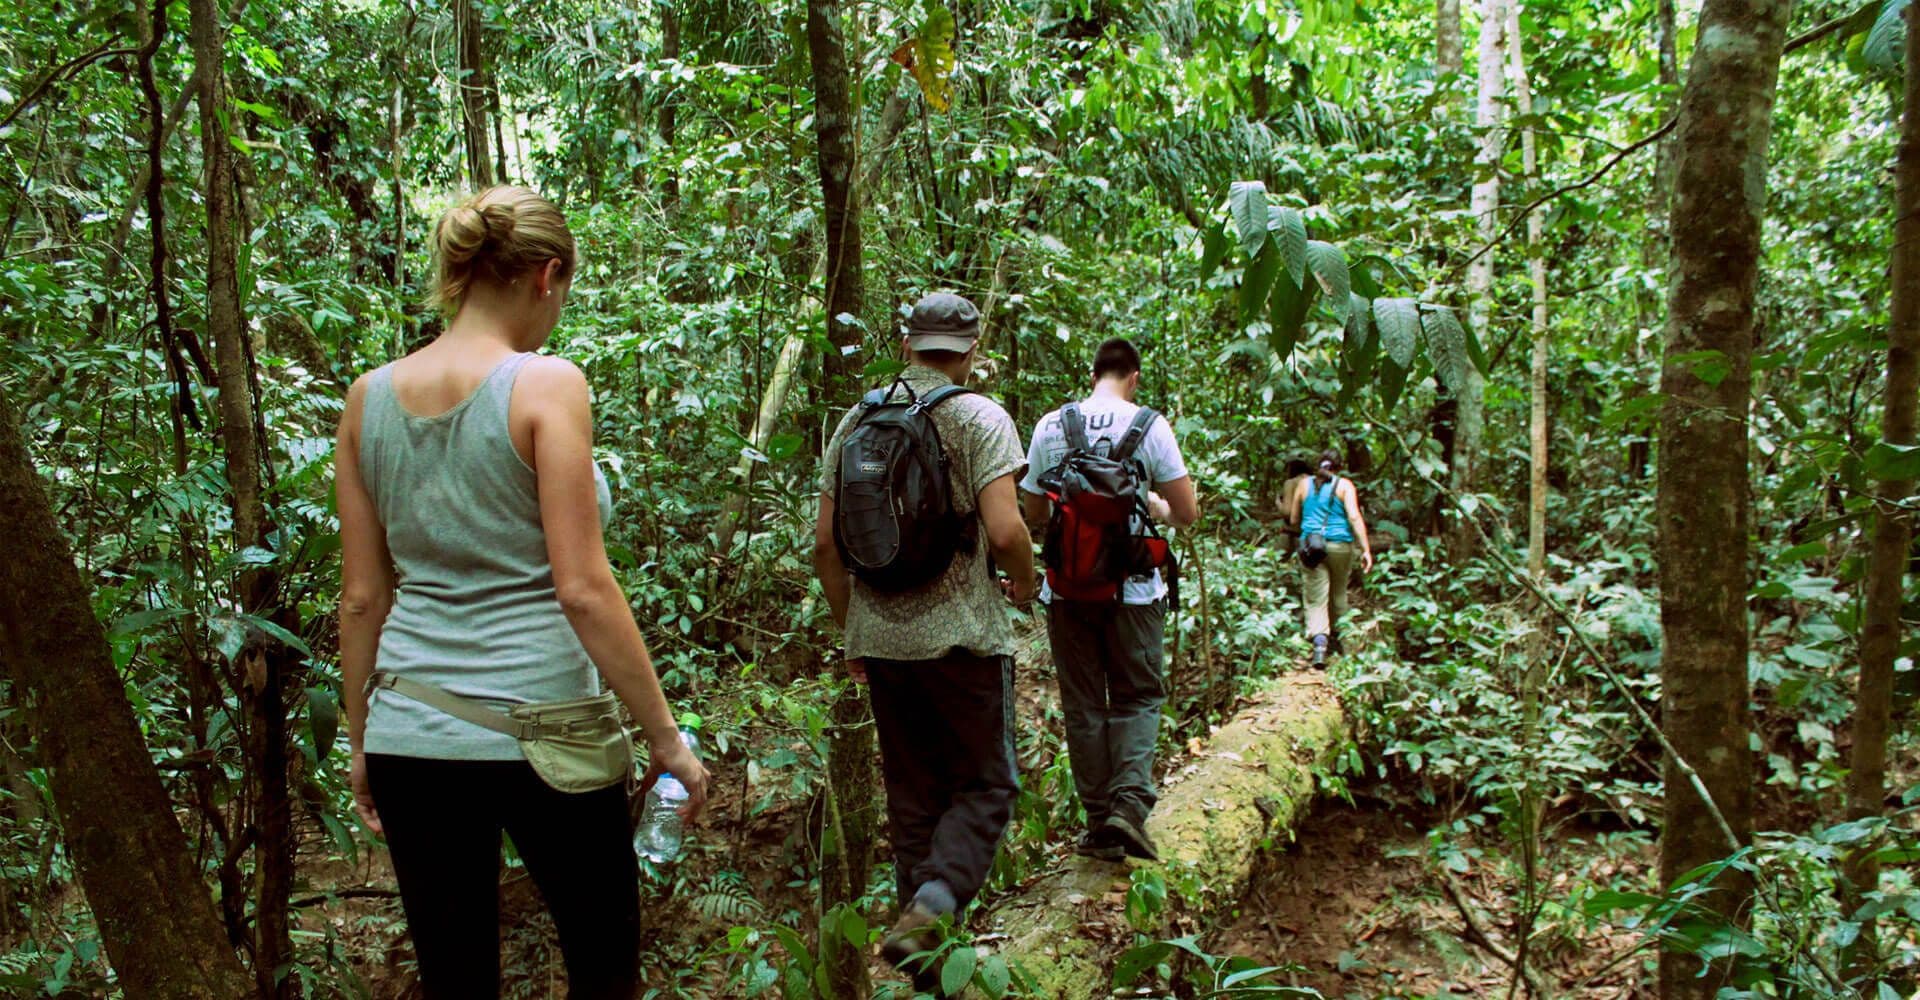 Tourists get experience in trekking with foot paths in Makanadawa Forest in Sri Lanka